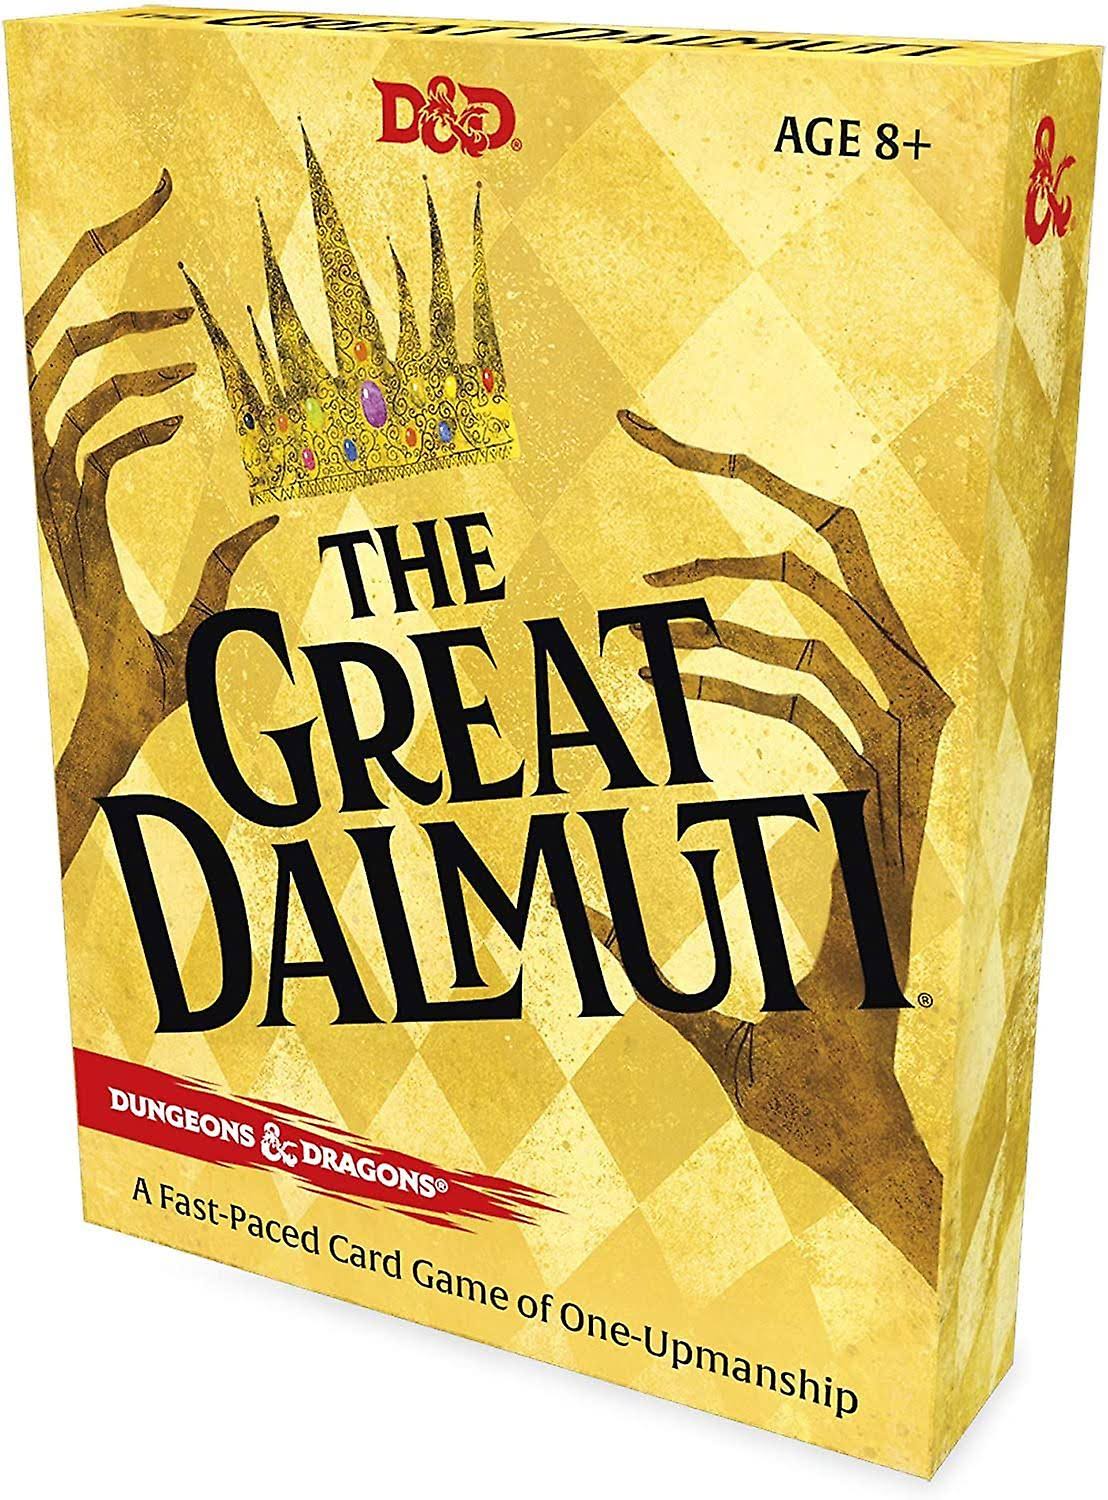 Dungeons & Dragons (D&D) The Great Dalmuti